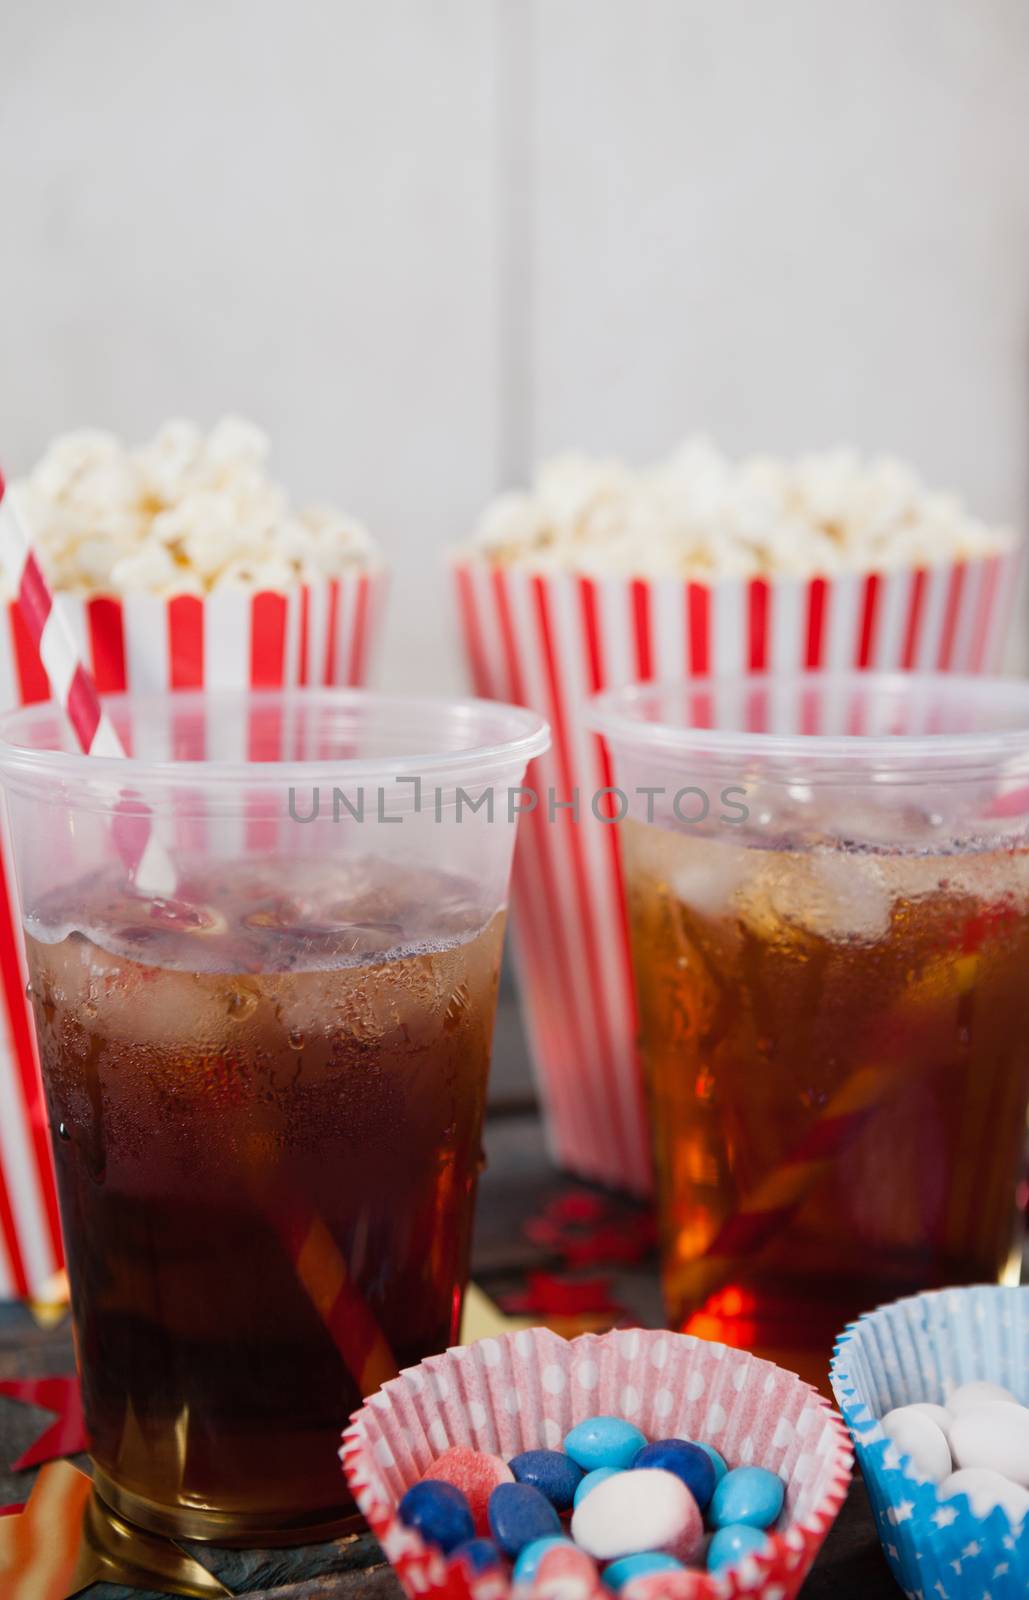 Popcorn, confectionery and drink with 4th july theme by Wavebreakmedia